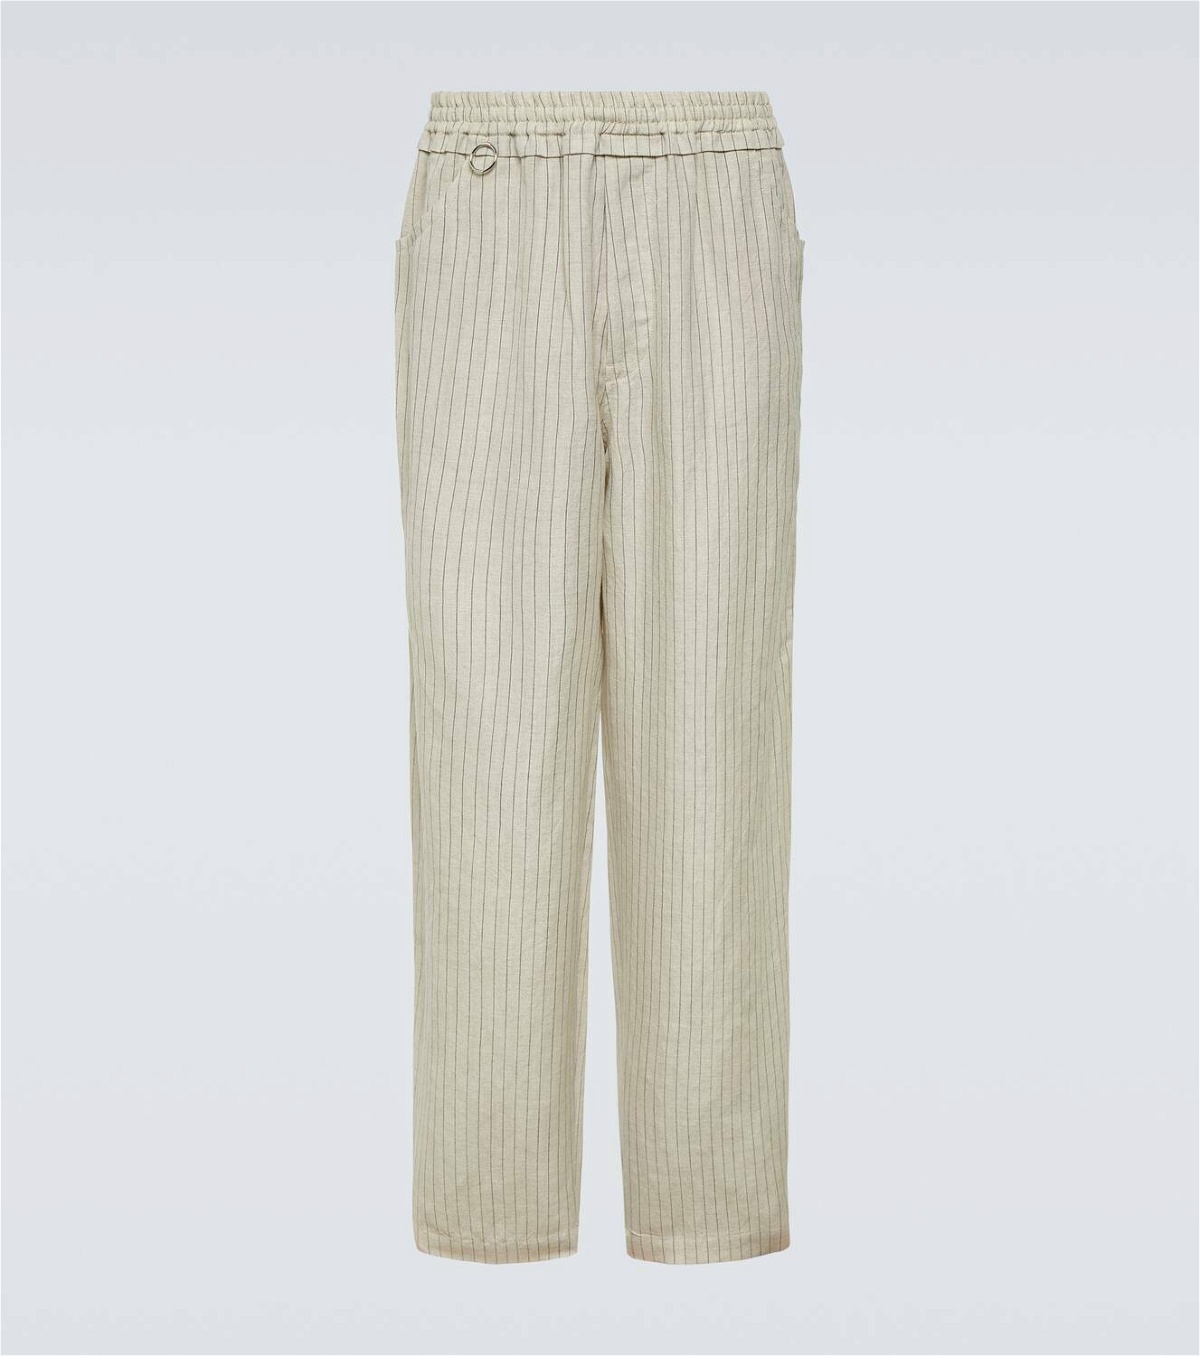 Undercover Pinstripe wool and linen wide-leg pants